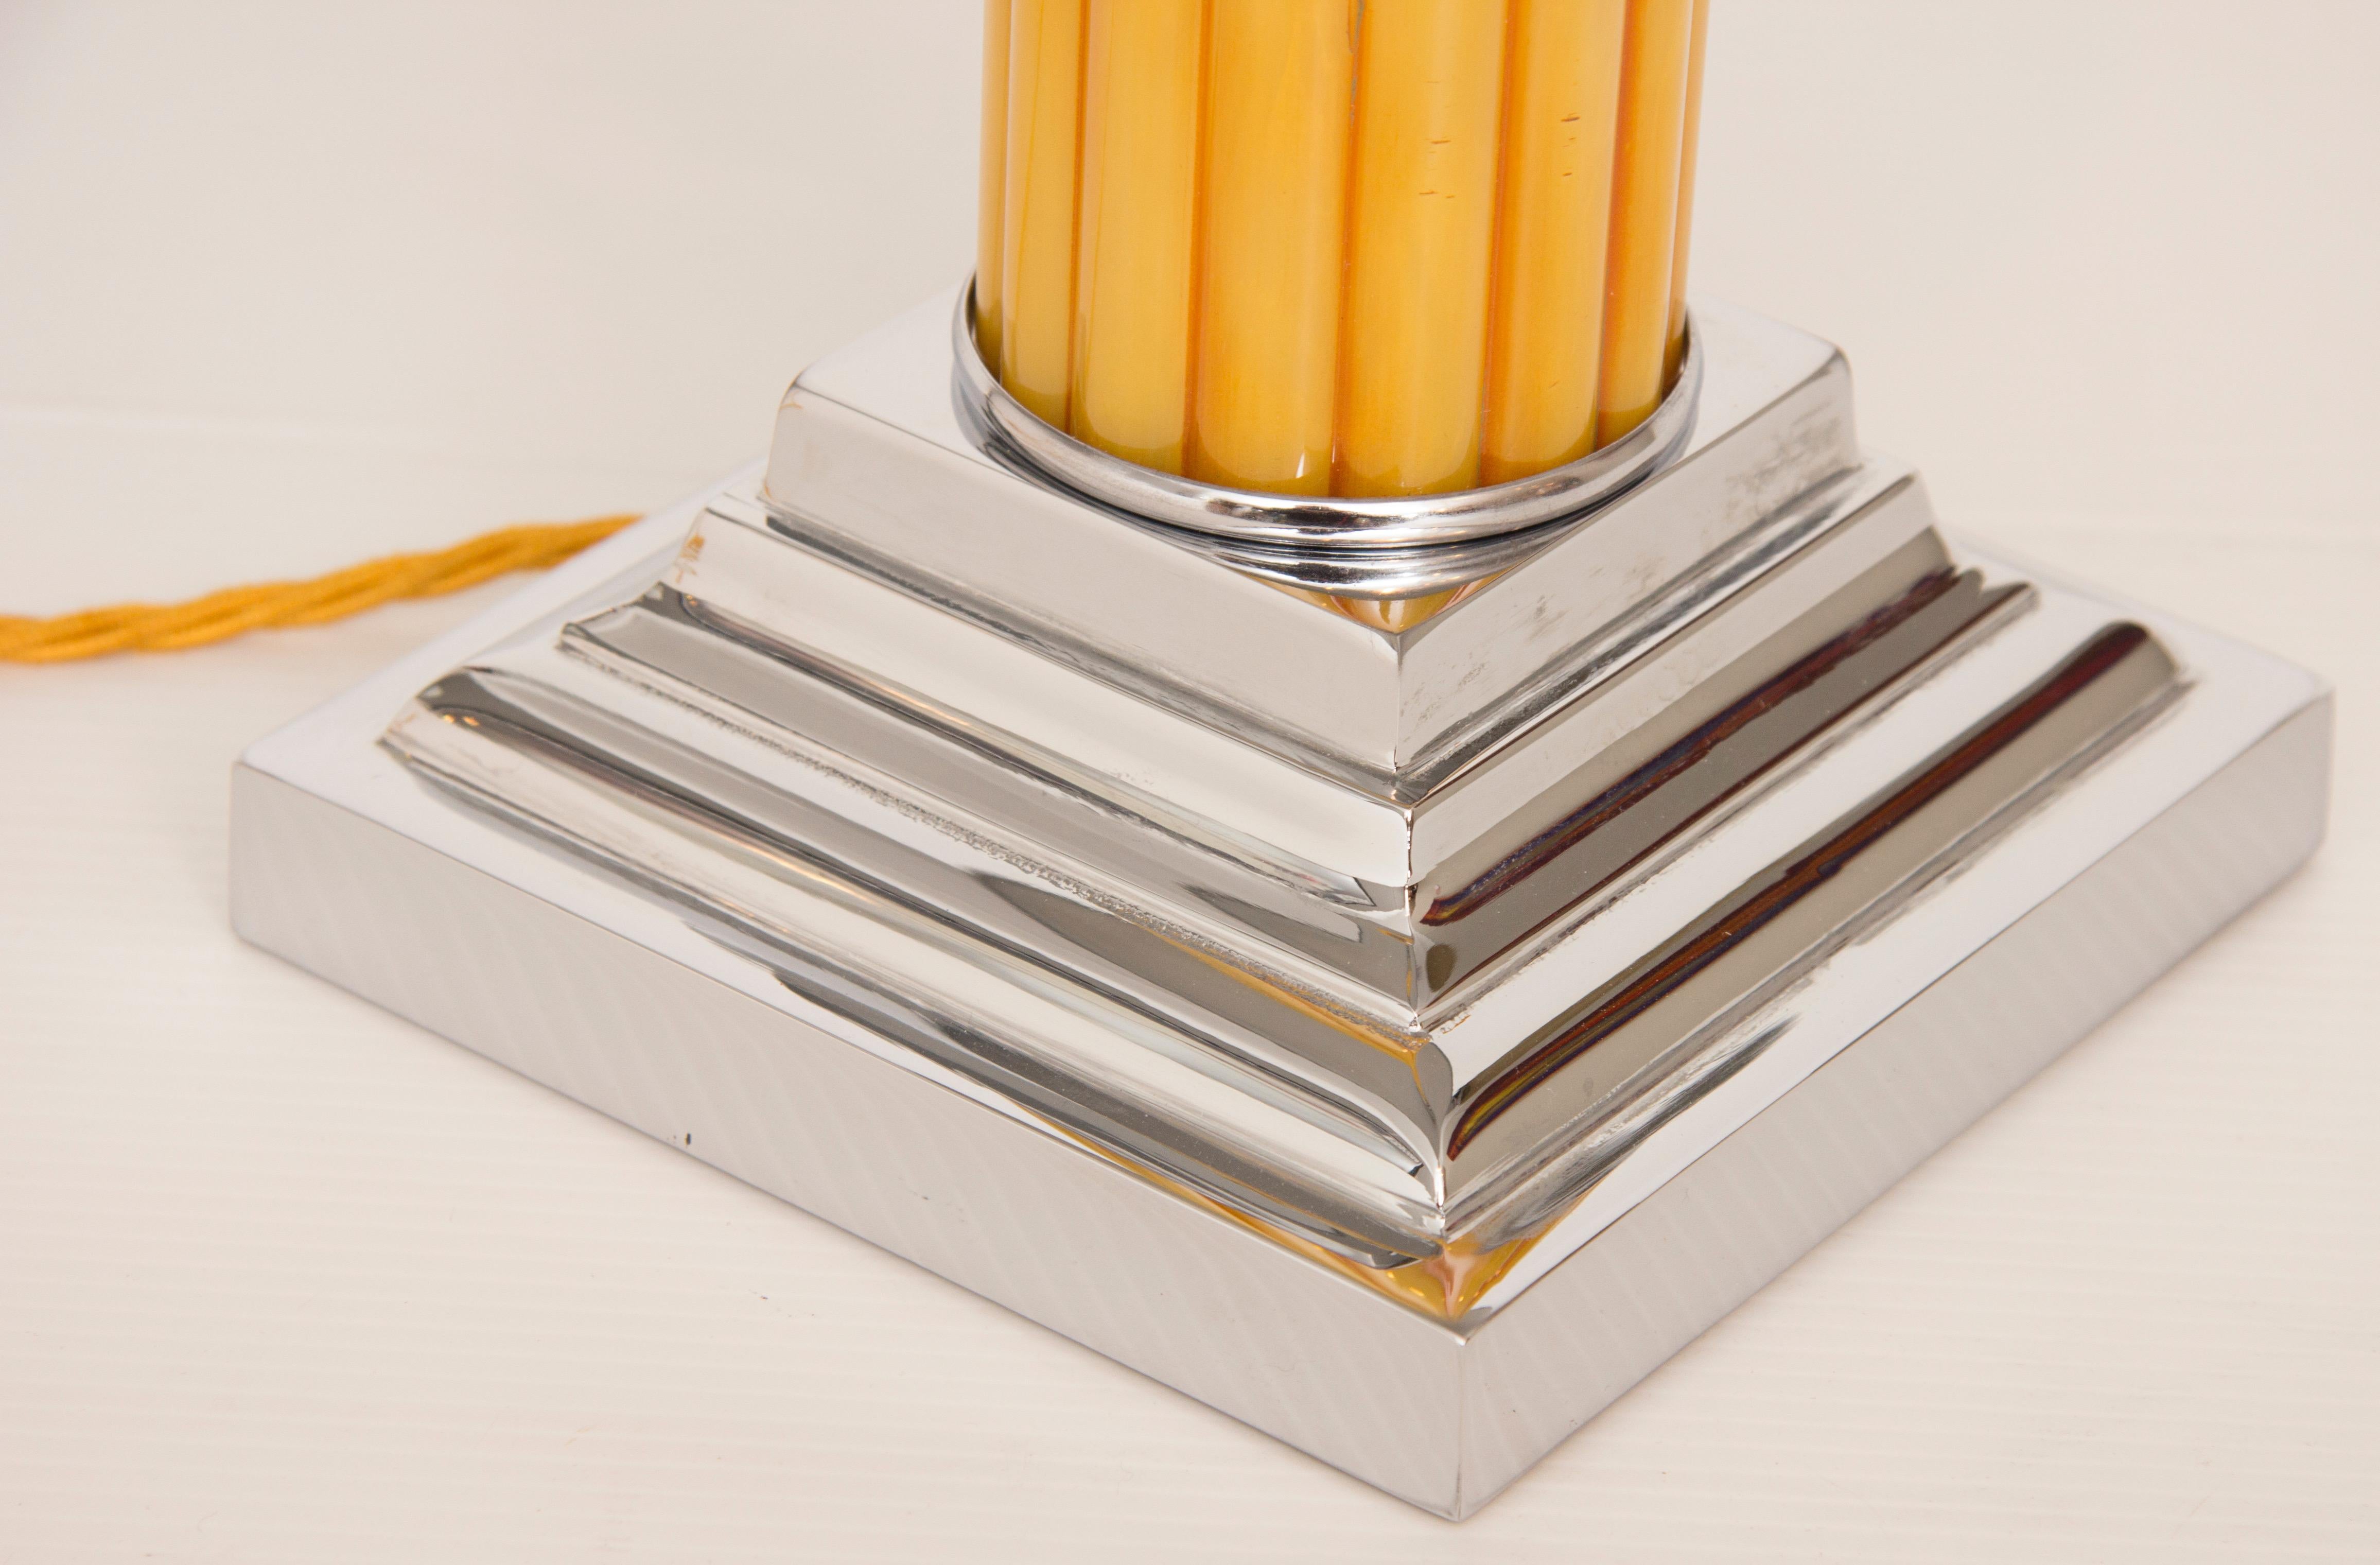 Art Deco desk or table.
A beautiful Art Deco desk or table lamp, the stepped chrome base with yellow phenolic ribbed column and chrome canopy shade with phenolic finial.
Measures: H 43 cm, W 37 cm, D 37 cm.
British, circa 1930.